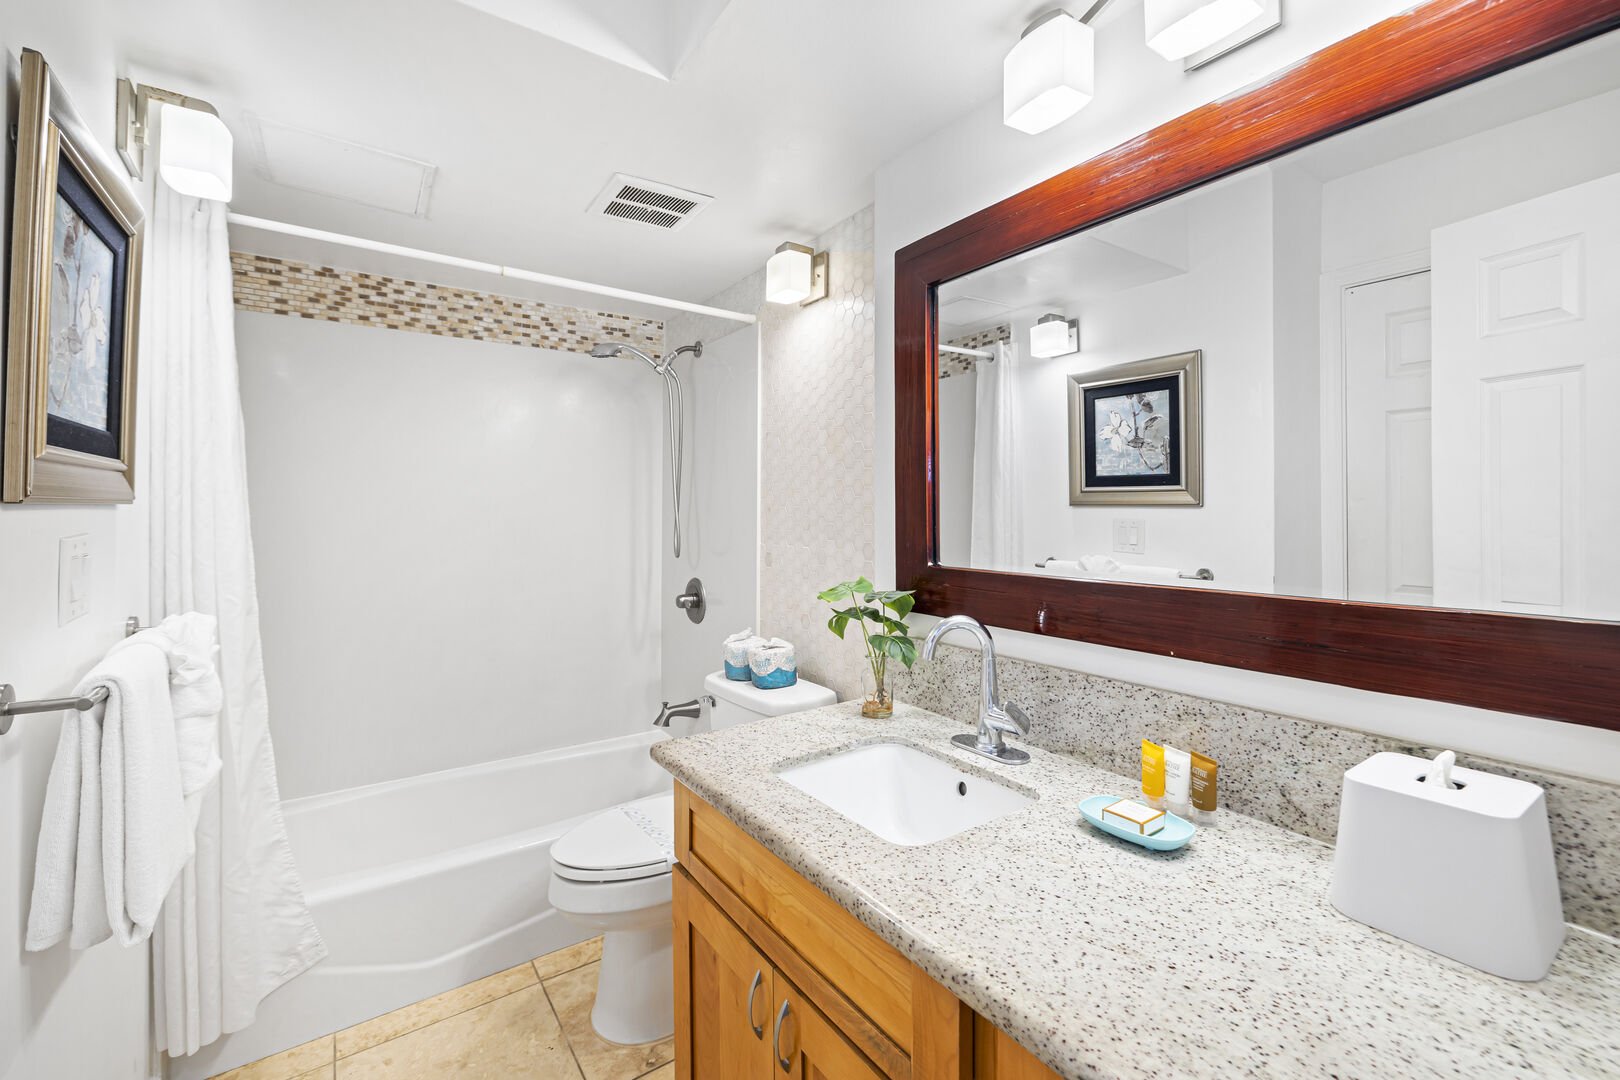 The full bathroom features a tub/shower combination!